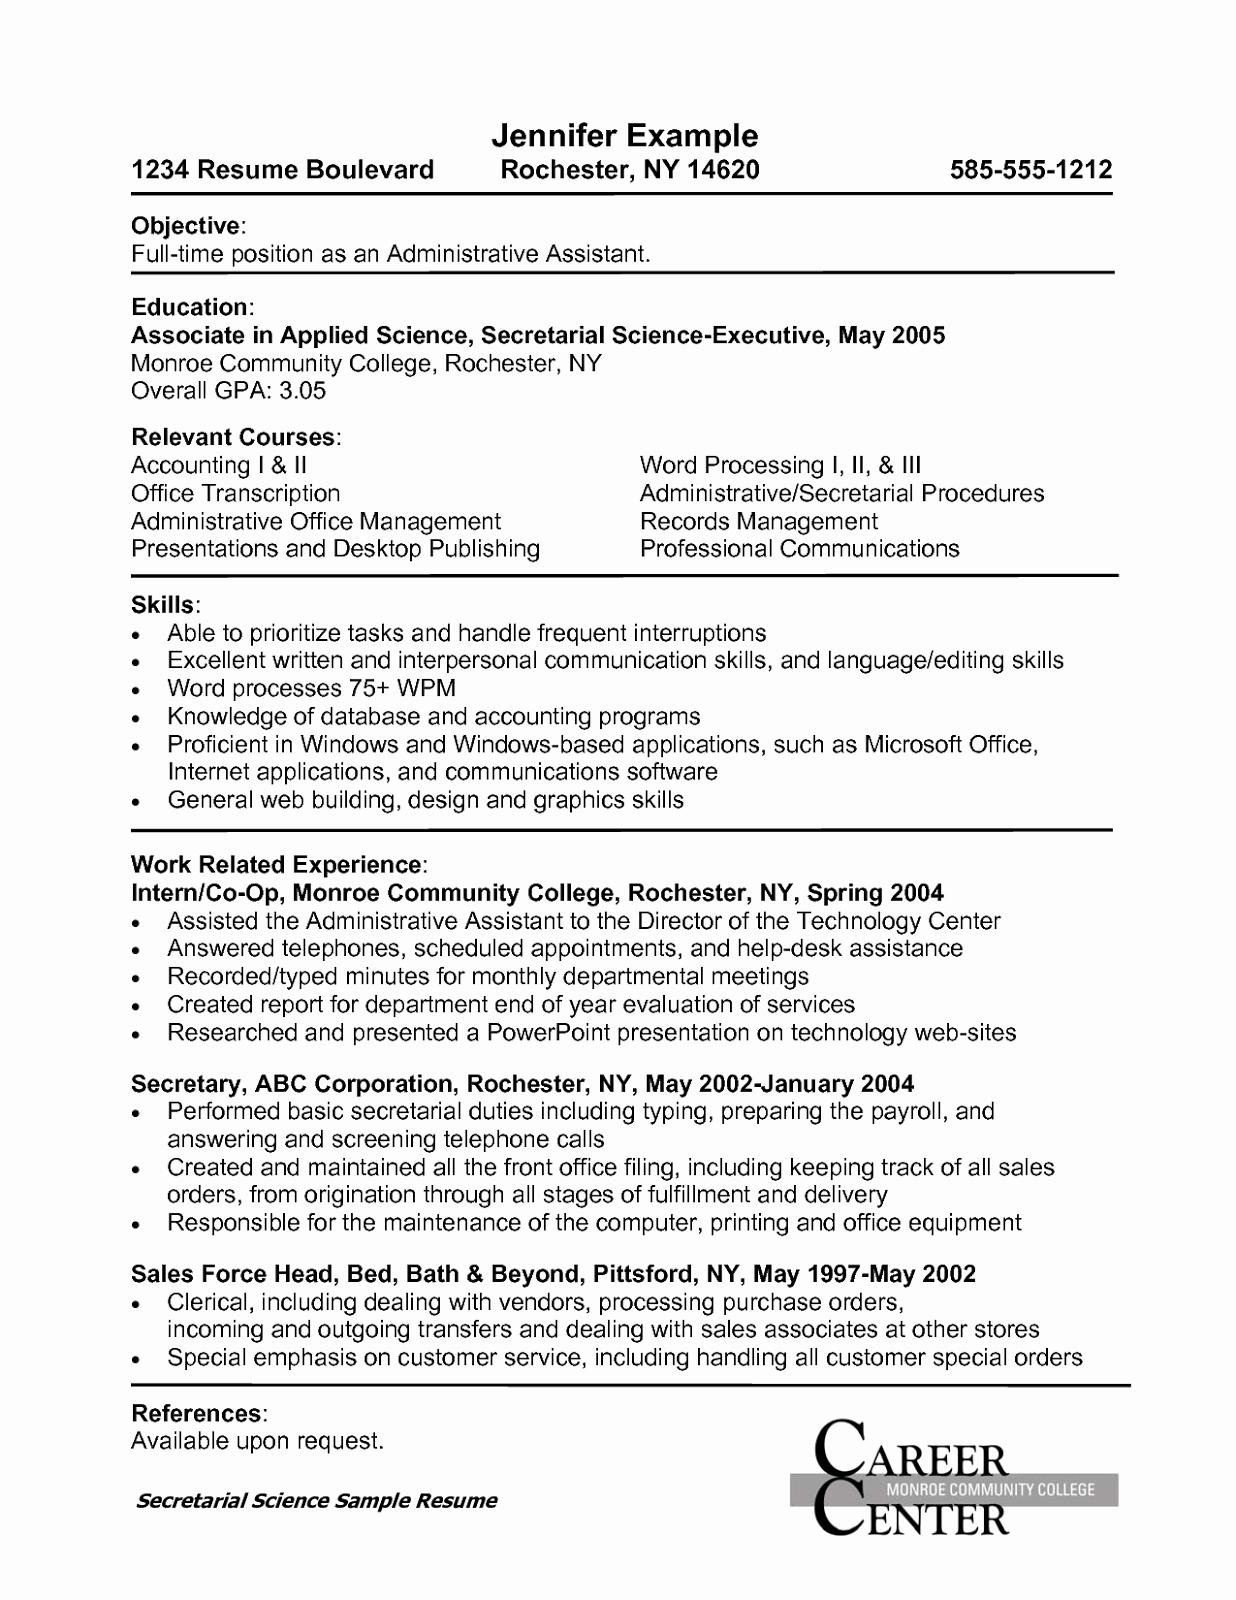 Administrative assistant Resume Objective Awesome Resume Administrative assistant Objective Examples